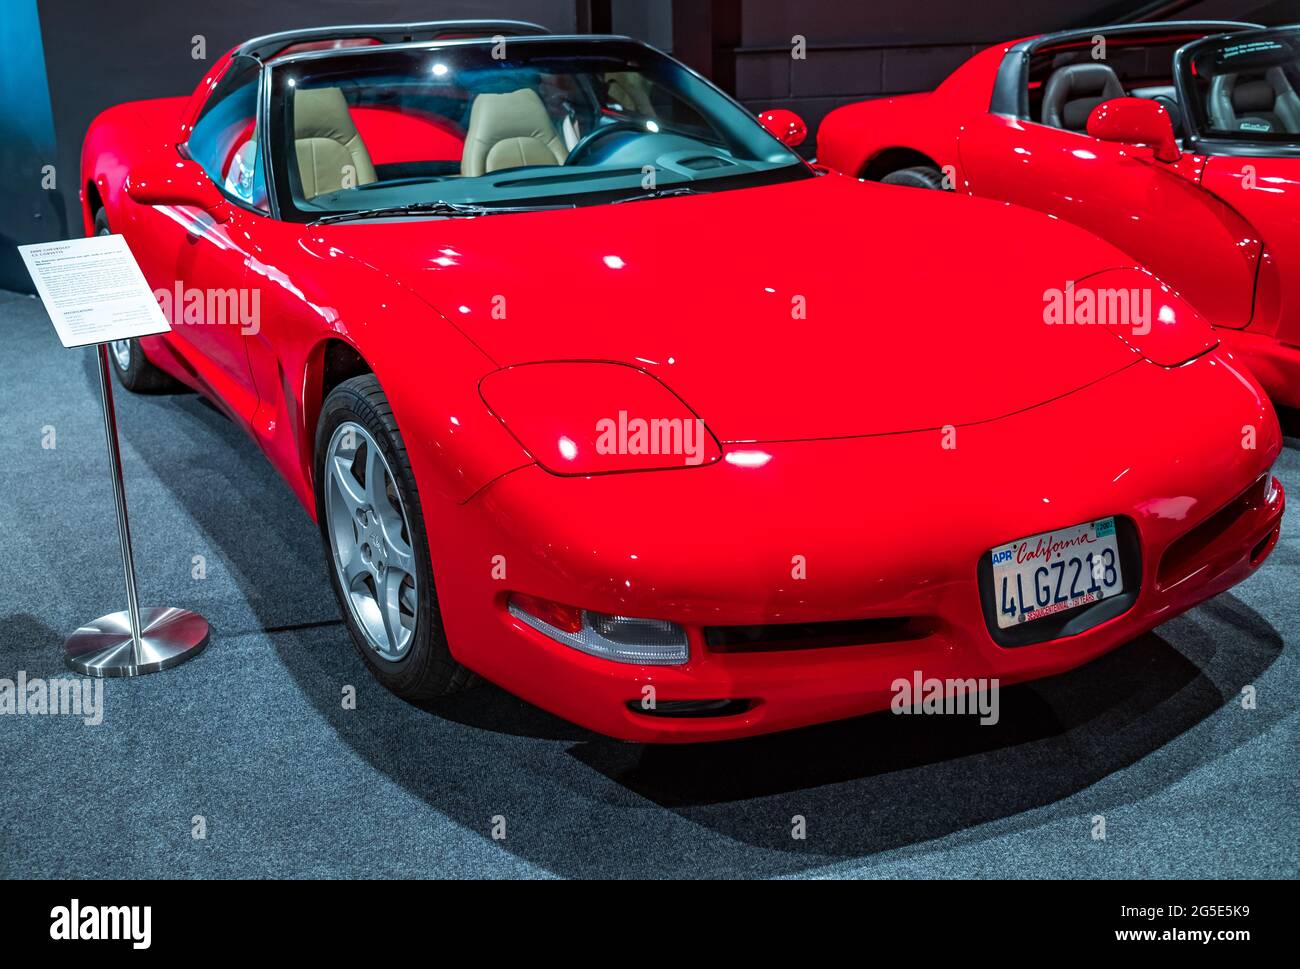 Yeovil, Somerset, UK – June 18 2021. Bright red Chevrolet C5 Corvette sports car on display to the general public at a car show Stock Photo